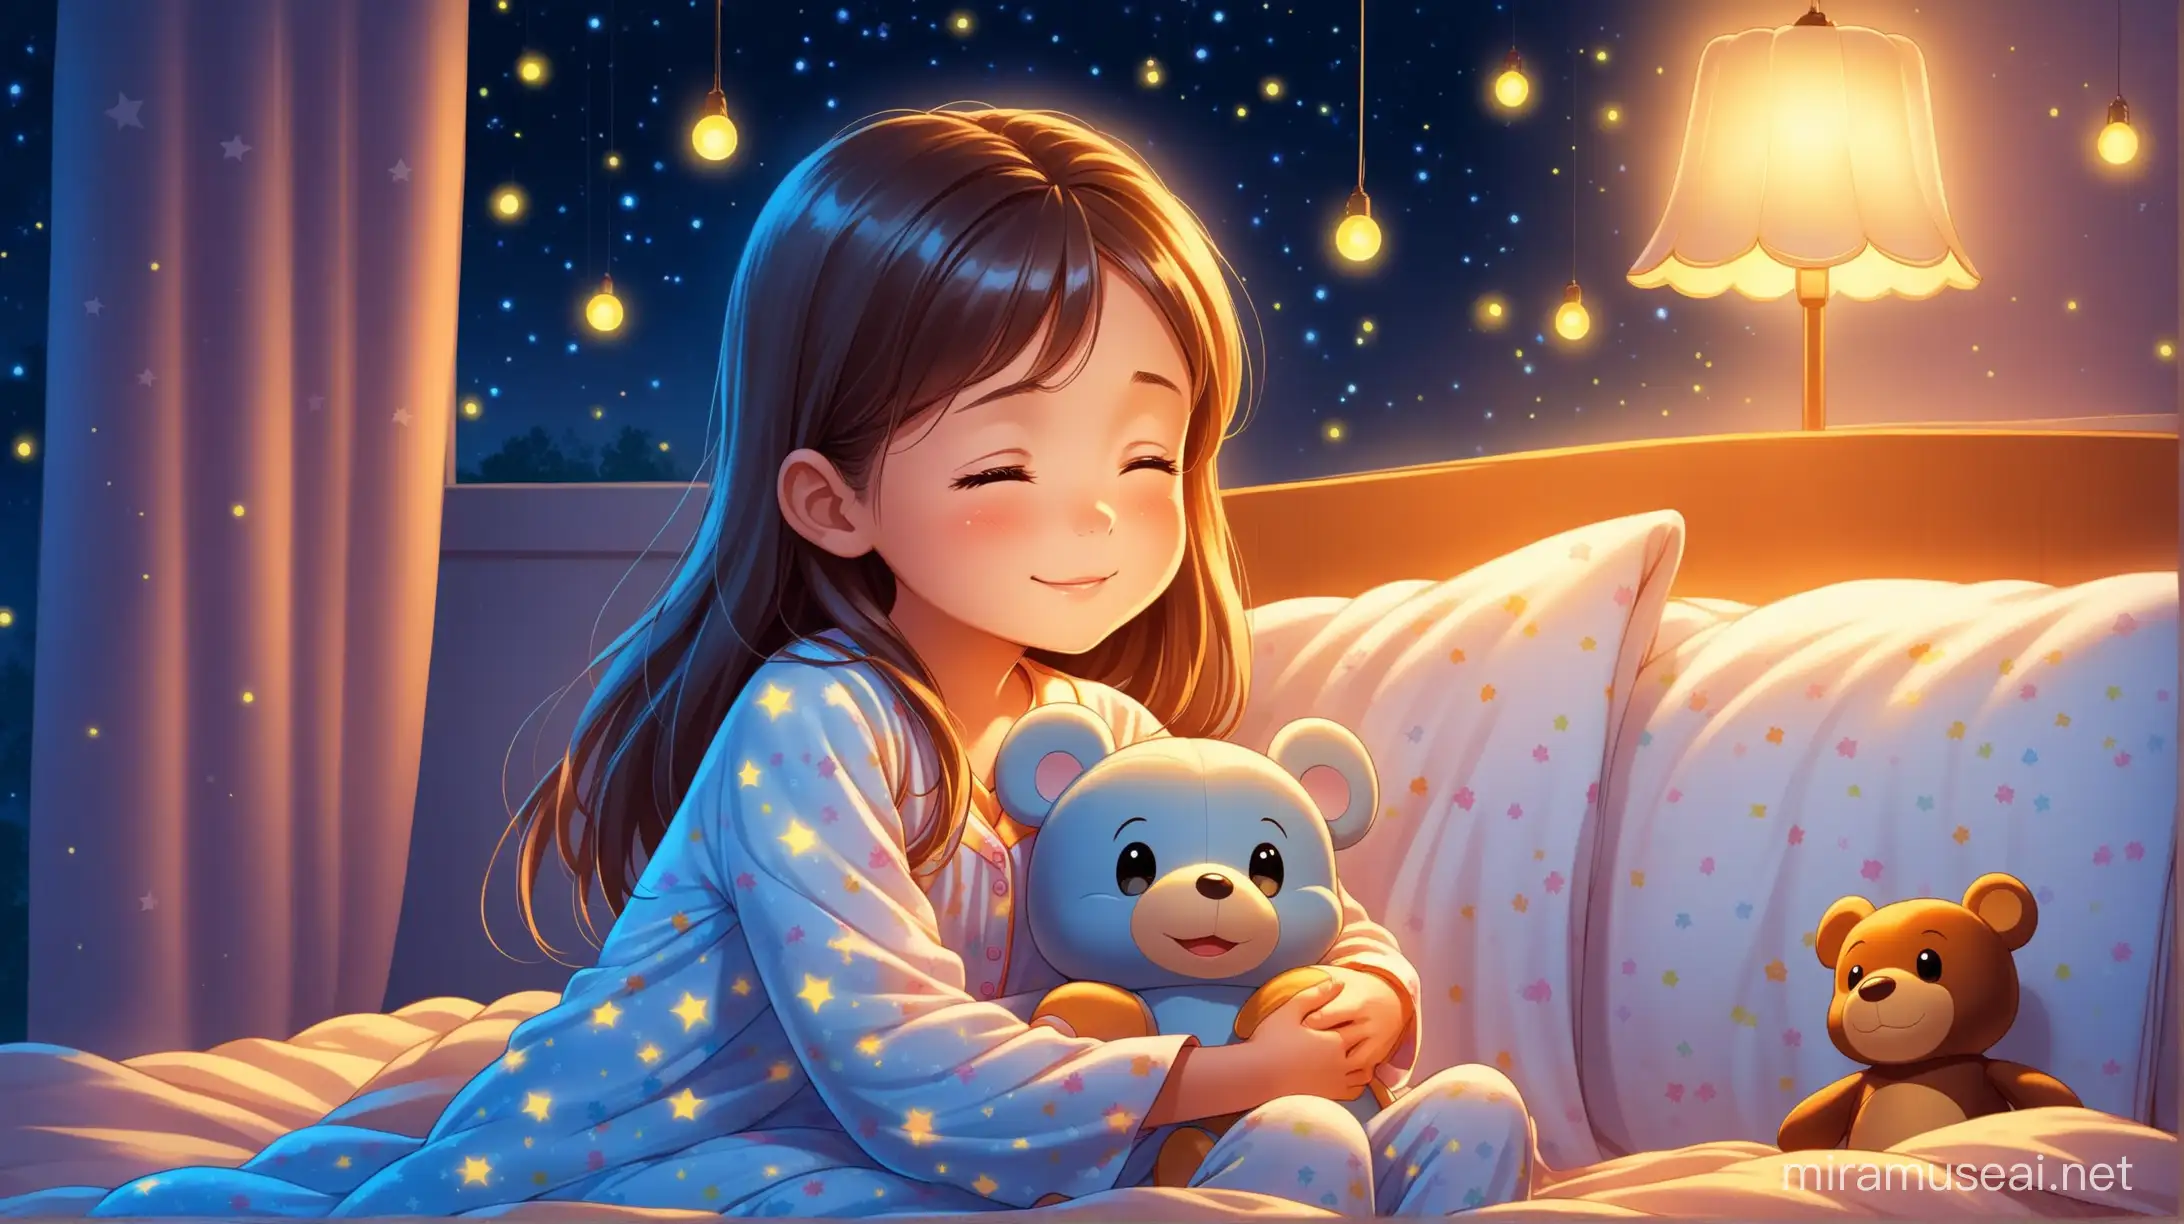 Morning stock photo, happy 10-year-old girl opens her eyes, the girl is in pajamas, sitting on the bed and hugging a childhood soft toy with a blanket. fireflies, evening, shining moonlight, disney cartoon style